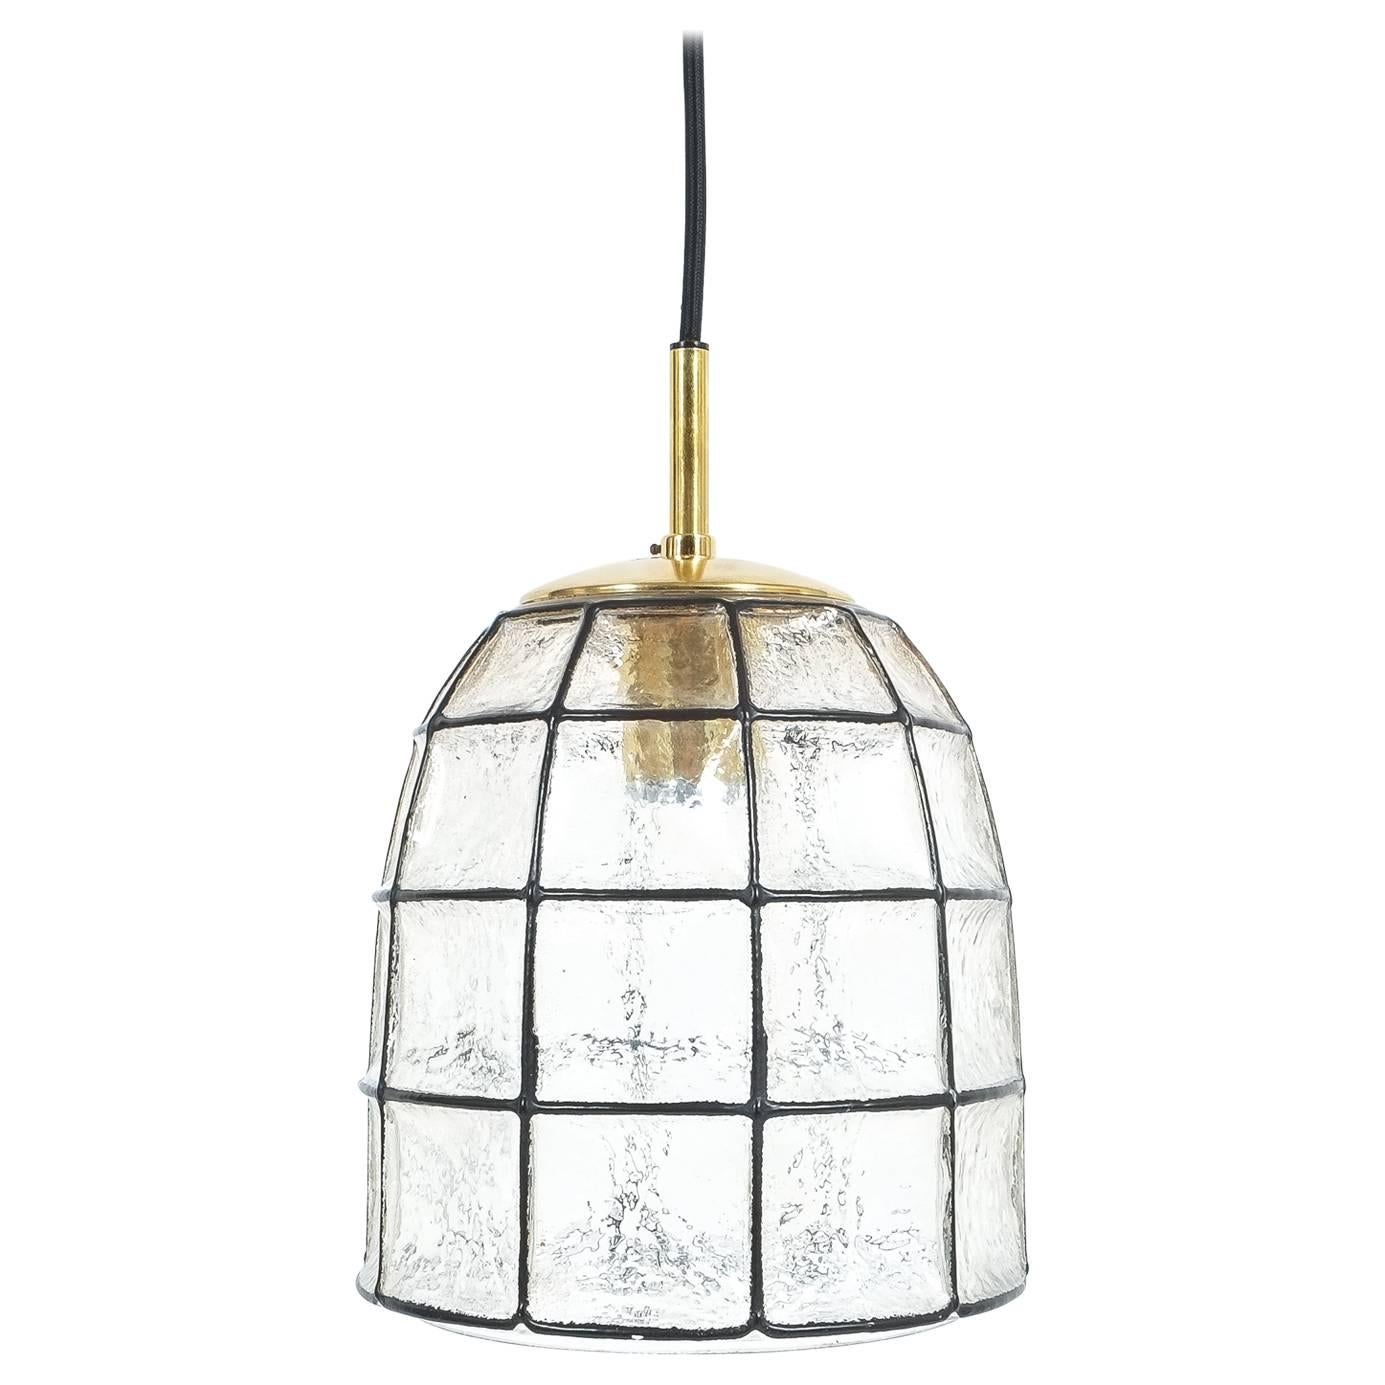 Pair of 'iron' and glass bell-shaped pendant light by Limburg, Germany. The fixtures feature a concave thick clear glass shade with rectangular black accent 'iron' elements. The hardware is made from polished brass. It holds a single large bulb